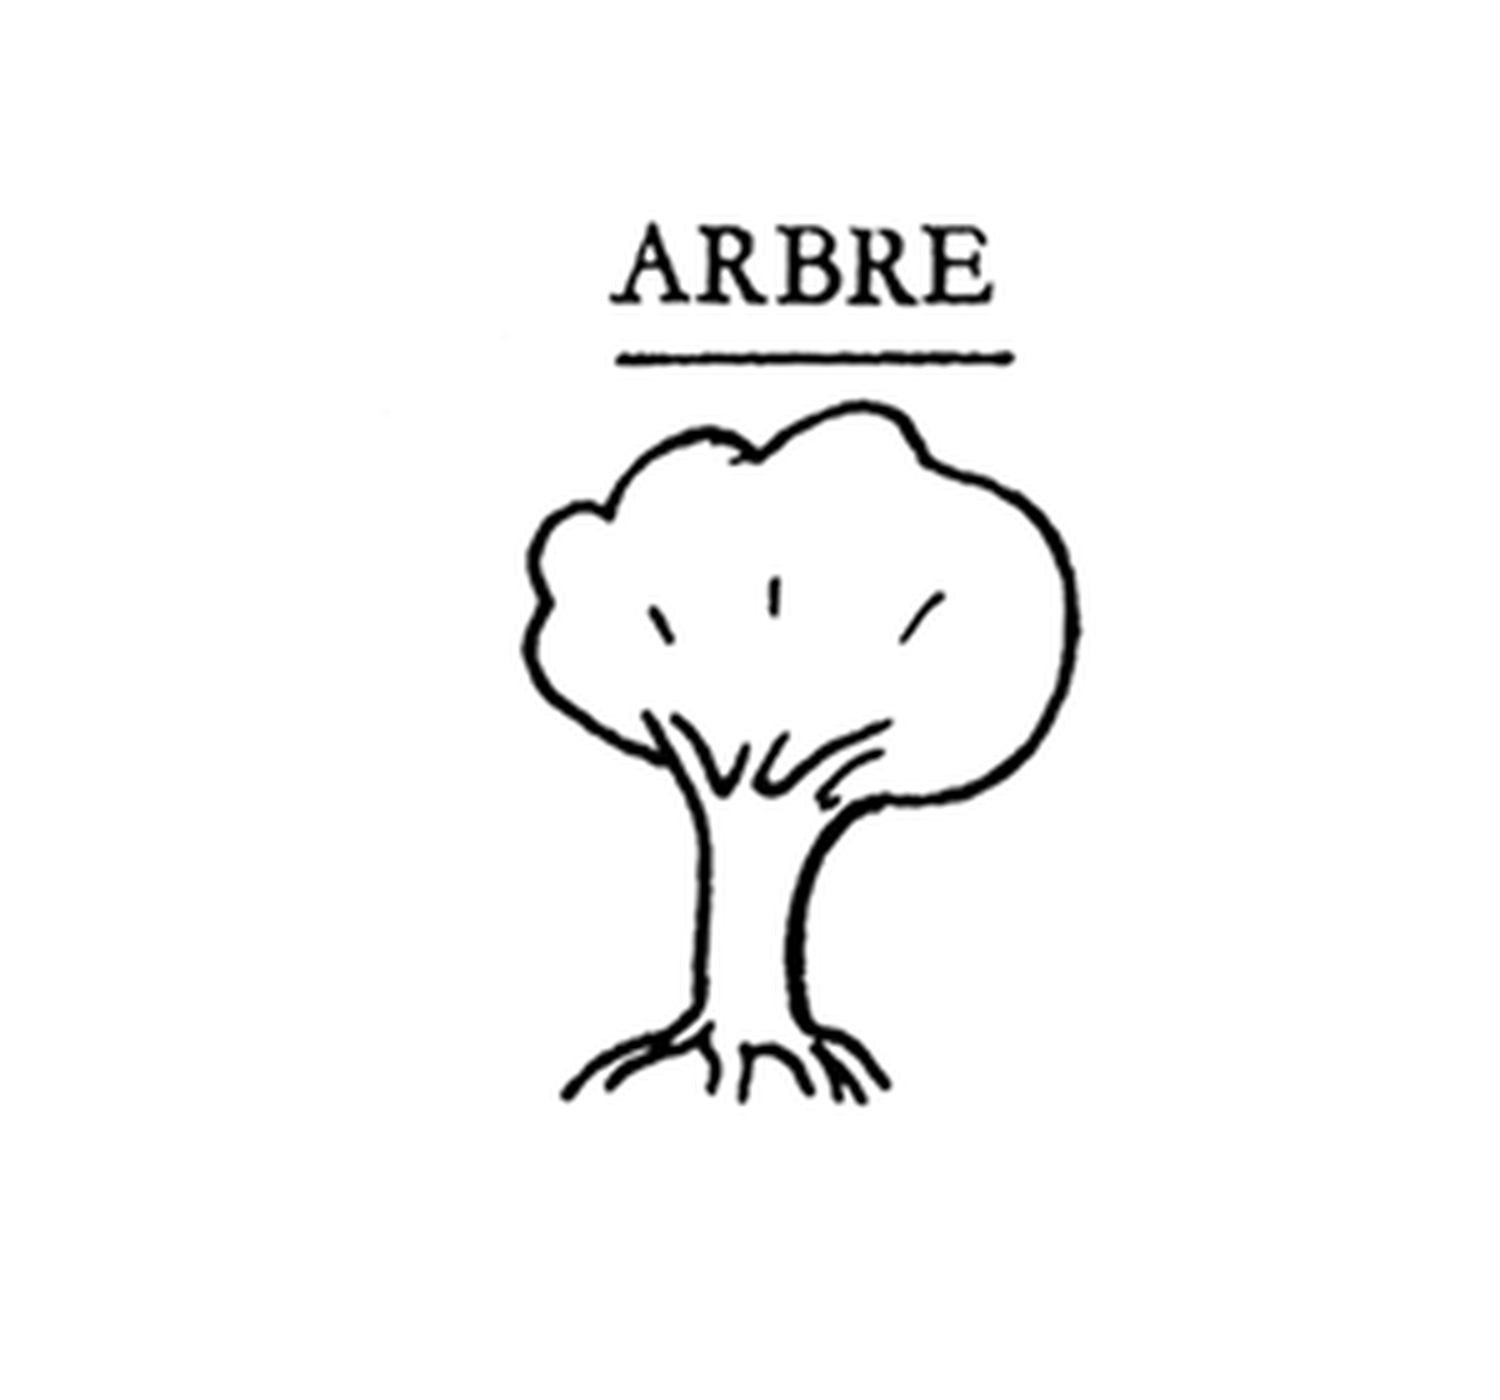 Figure 1 is Arbre-- Lacan’s revision of the Sausserian sign. The places of the signifier and signified have been flipped and are no longer bound together by an enclosing circle. Image from lacanonline.com. 